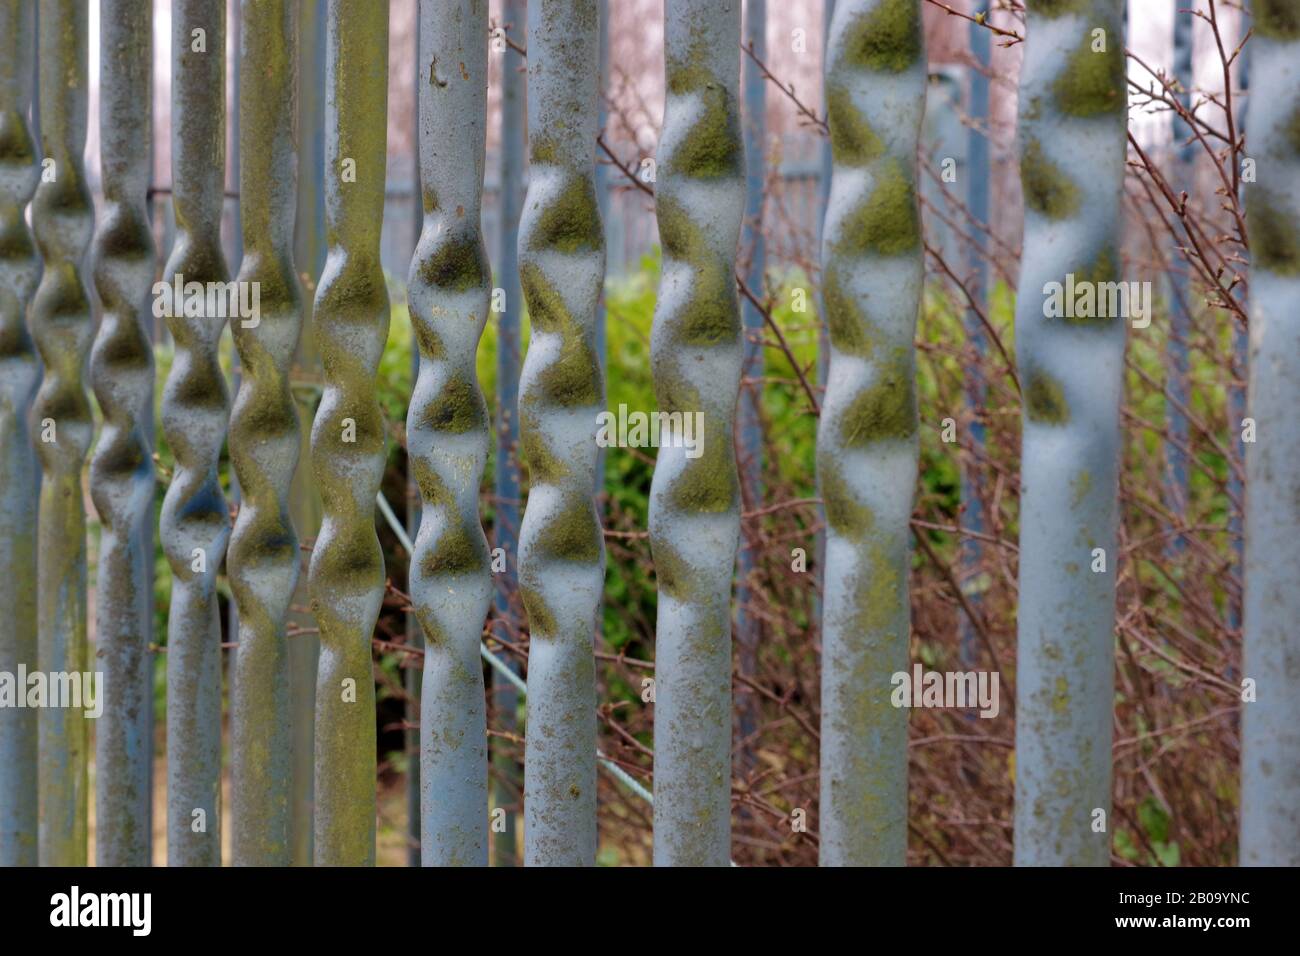 Artistic metal gate railings at business units, abstract Stock Photo